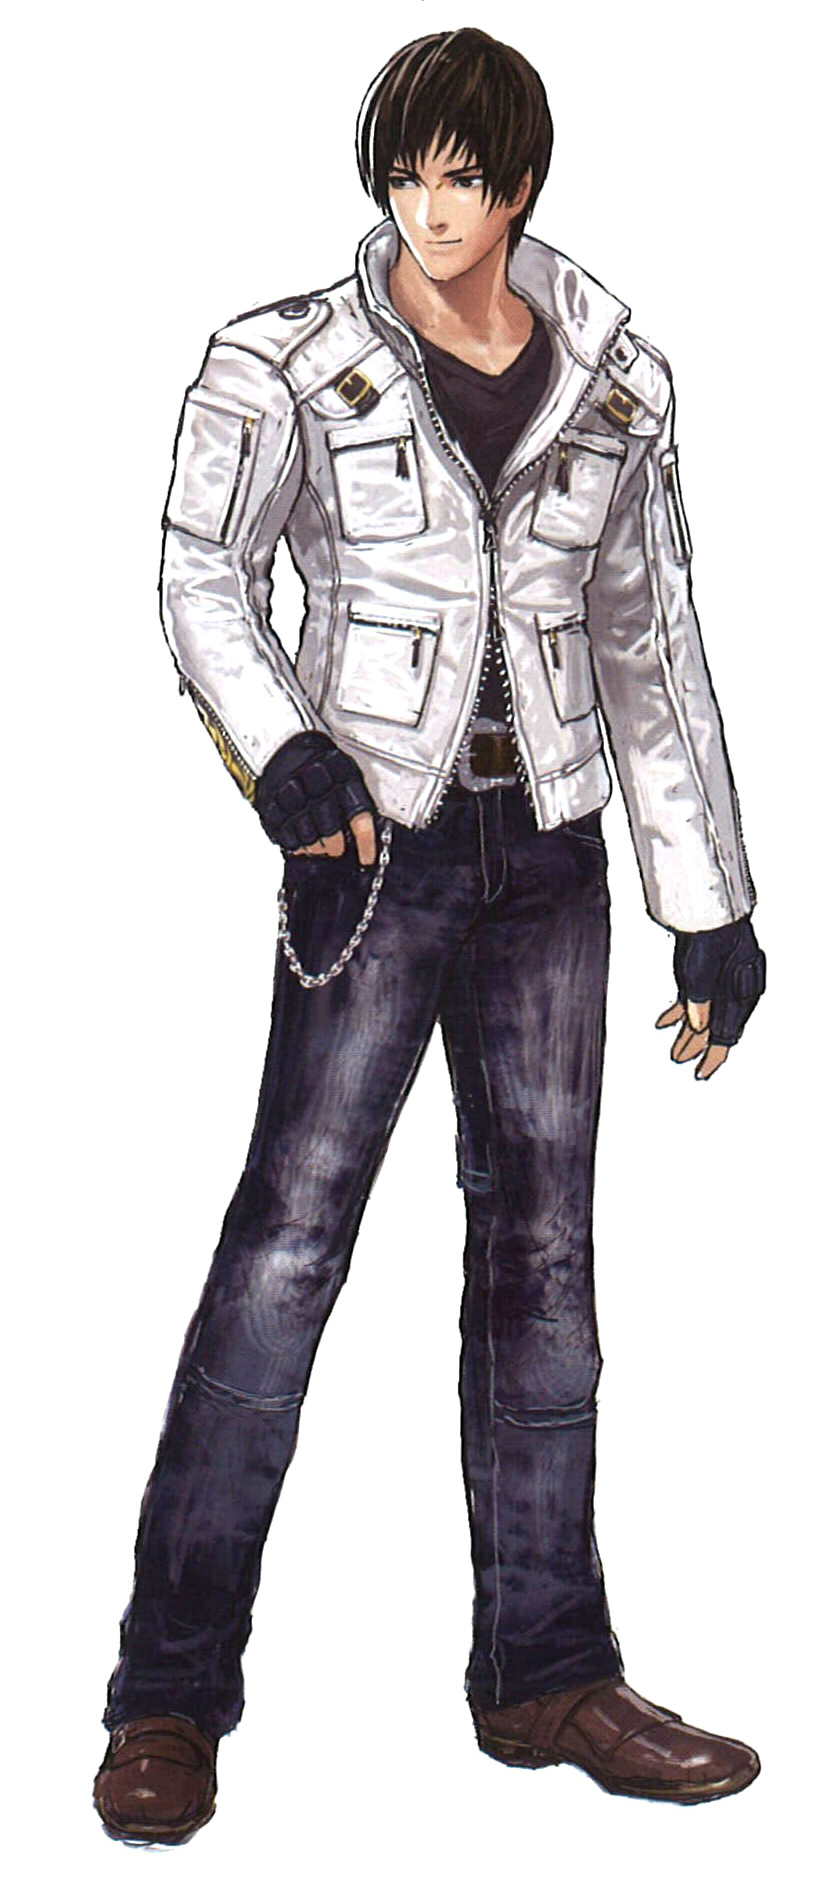 The King Of Fighters Kyo Kyo Kusanagi | The King of Fighters Wiki | Fandom